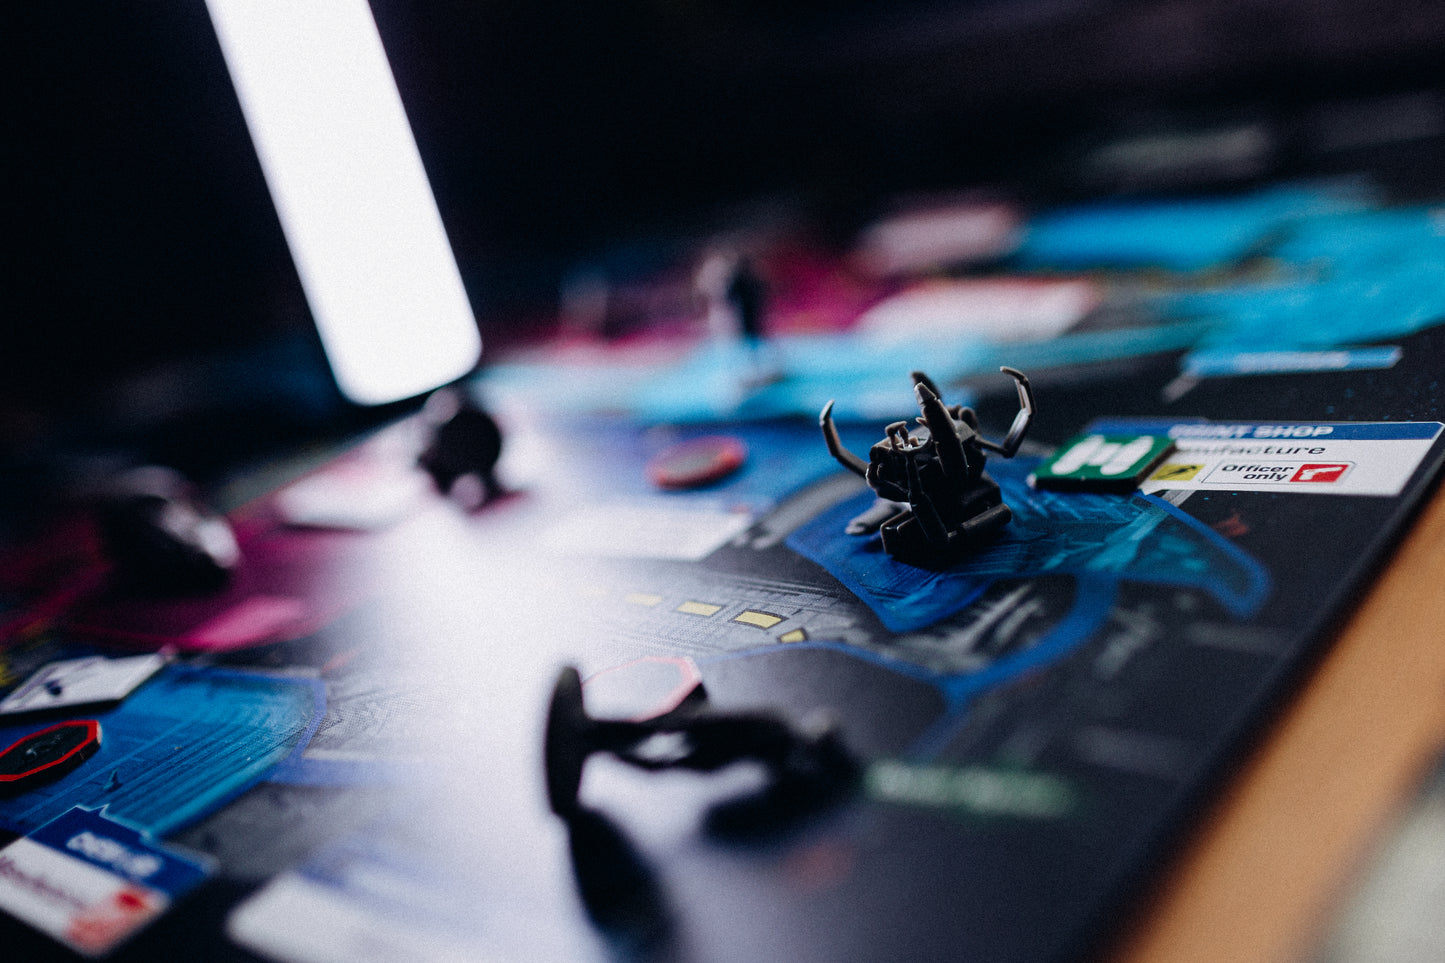 Dramatic picture of components on the game board with heavy shadows.